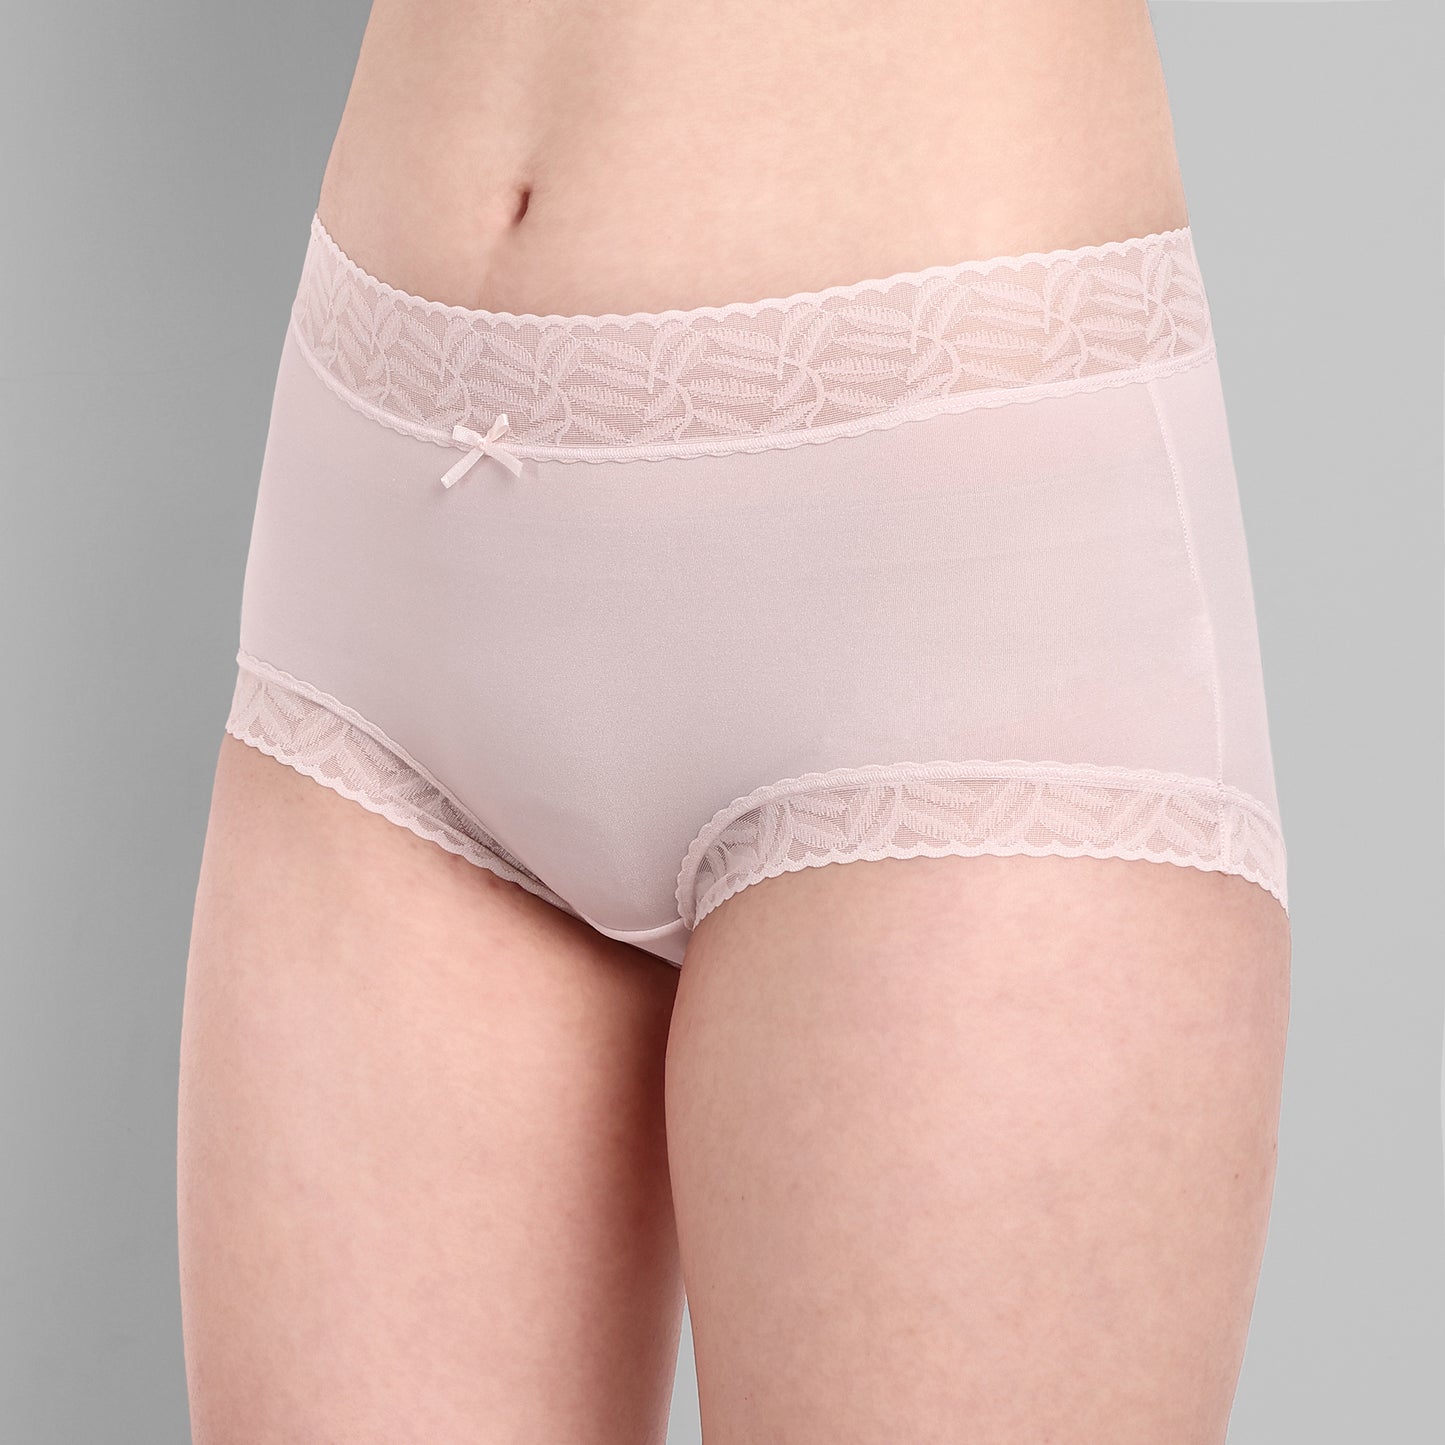 Women's Hipster Briefs BoyShorts Panty, Pack Of 3